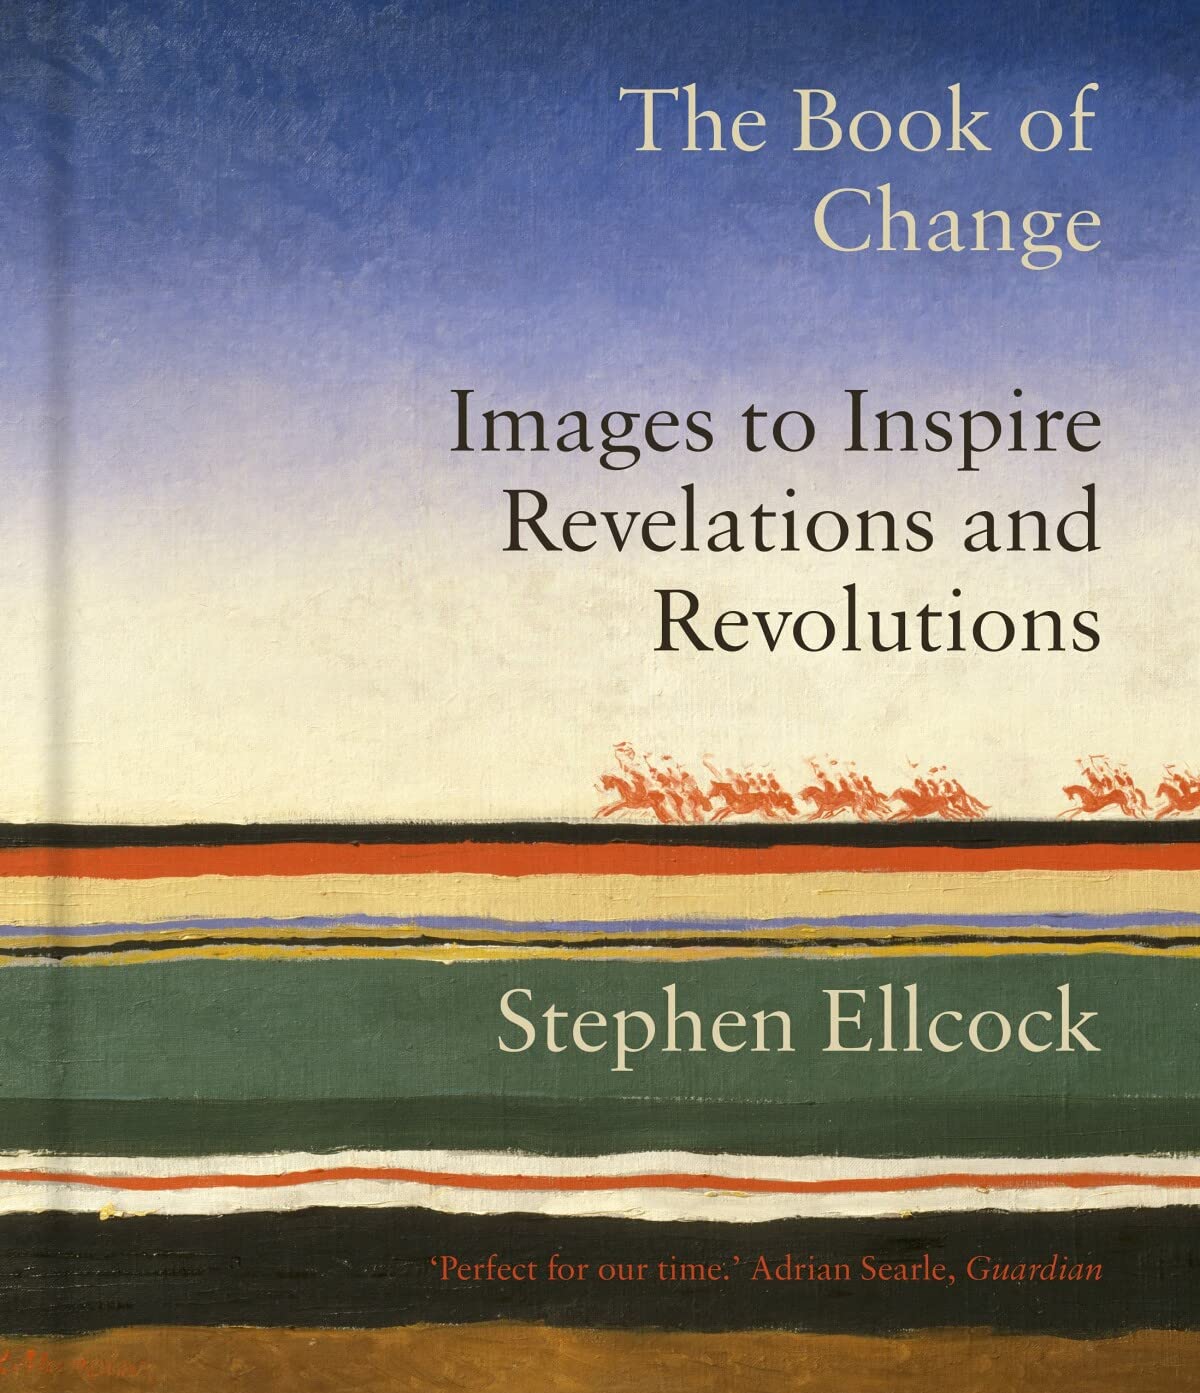 Book The Book of Change Stephen Ellcock